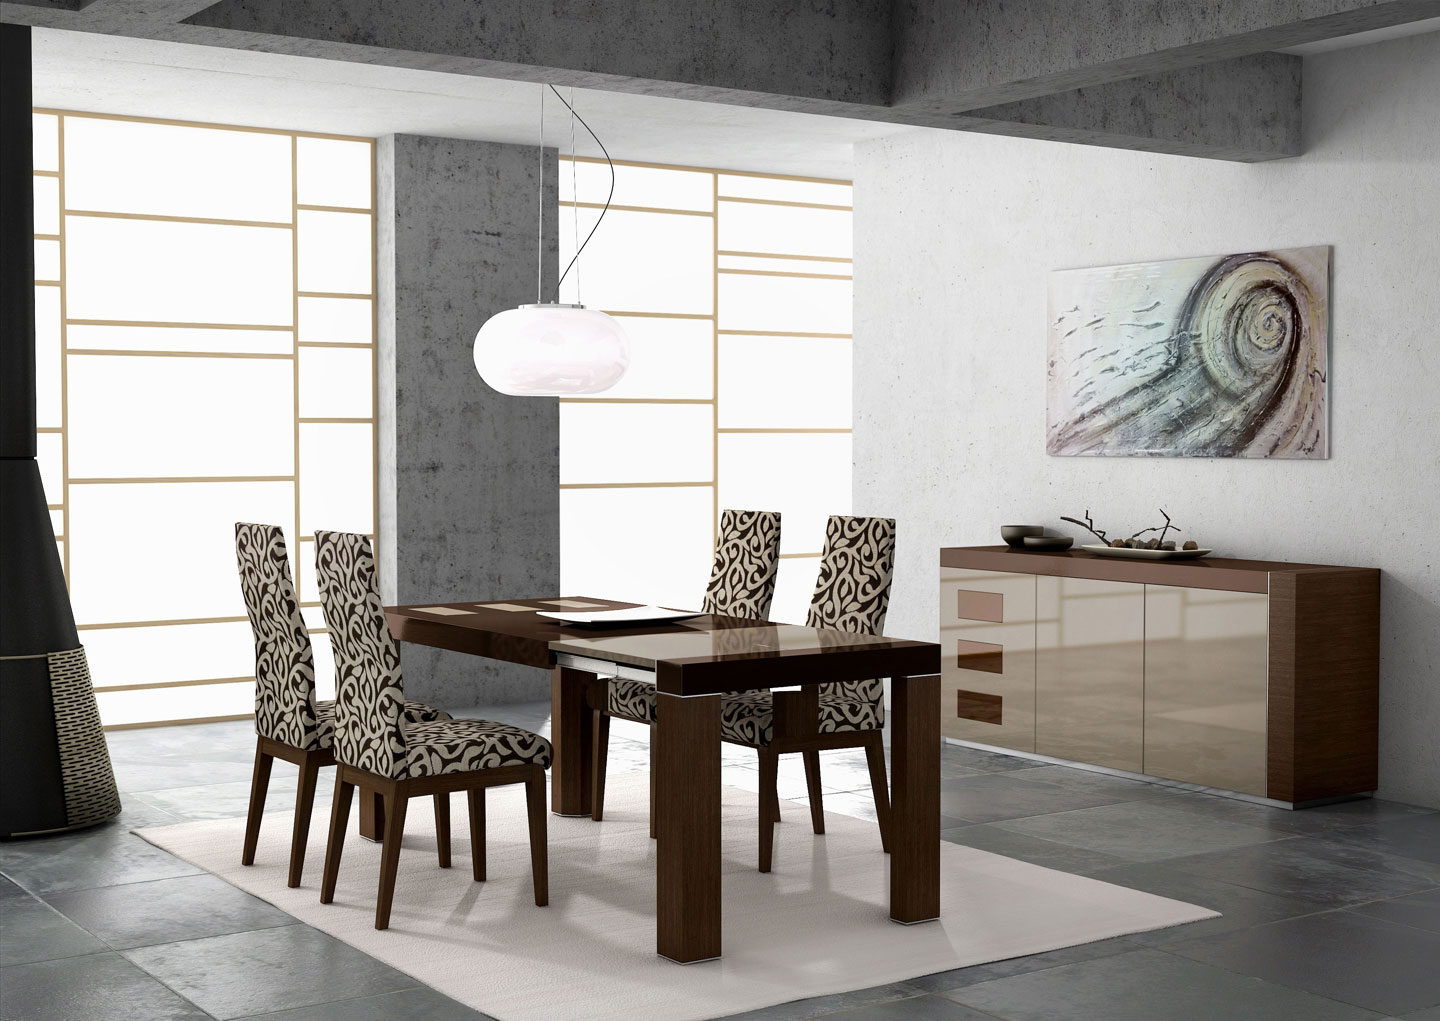 Wall Art Pendant Funky Wall Art Also Circular Pendant Light Feat Upholstered Chairs Design In Modern Dining Room Plus White Area Rug Dining Room Modern Dining Room In Stylish And Artistic Design